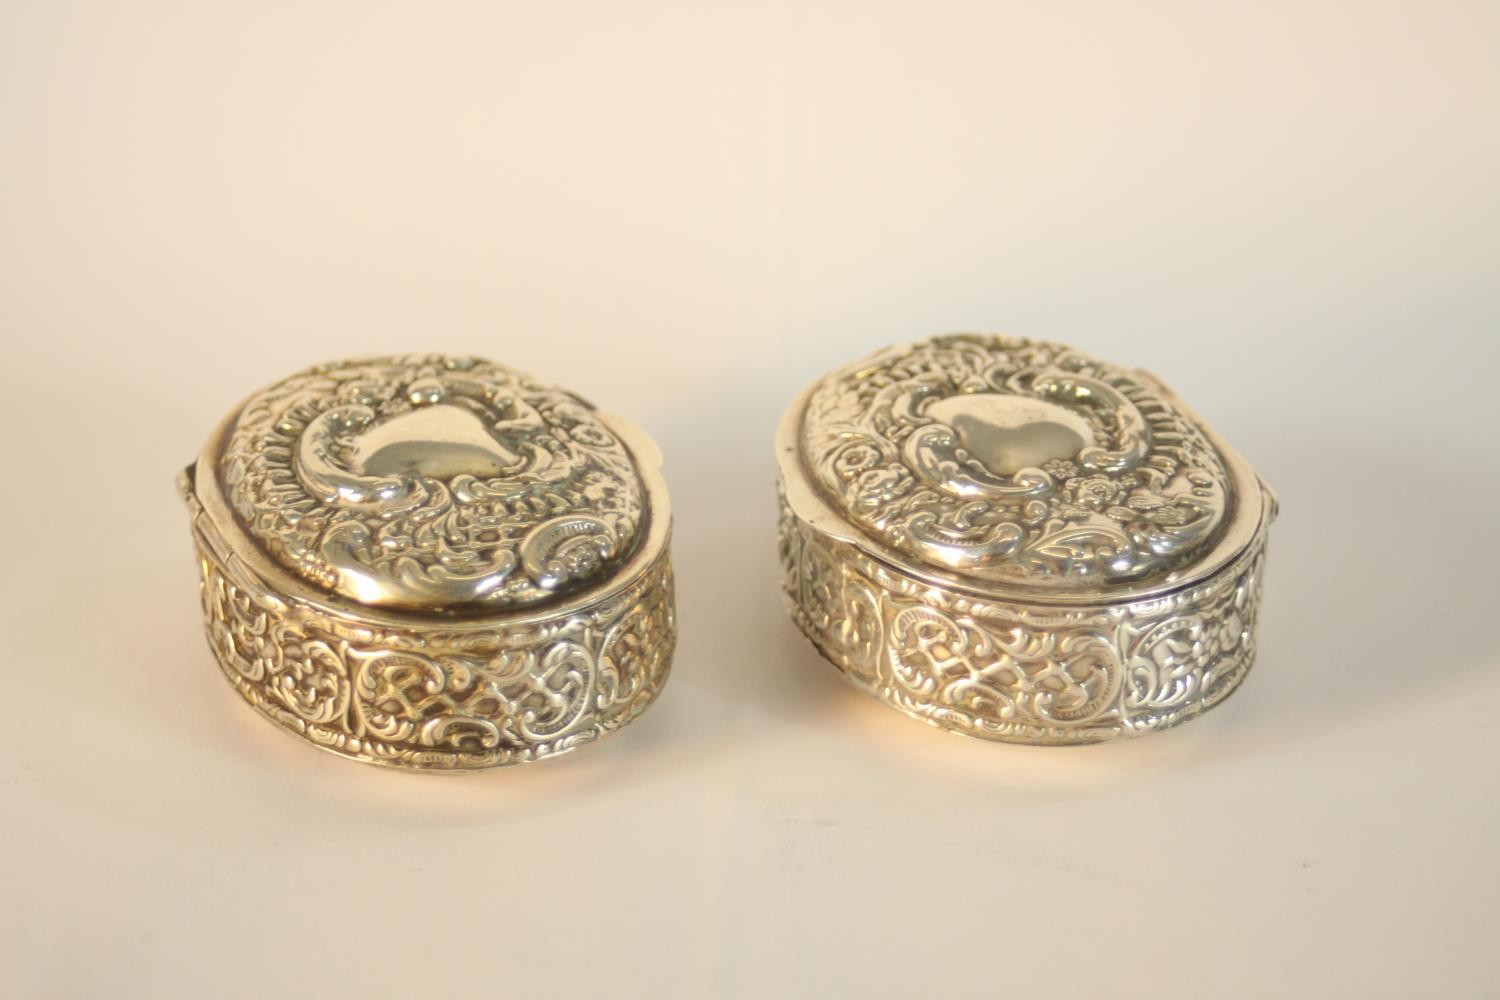 A pair of Edward VII hallmarked silver oval trinket boxes, Birmingham 1902, each with repousse